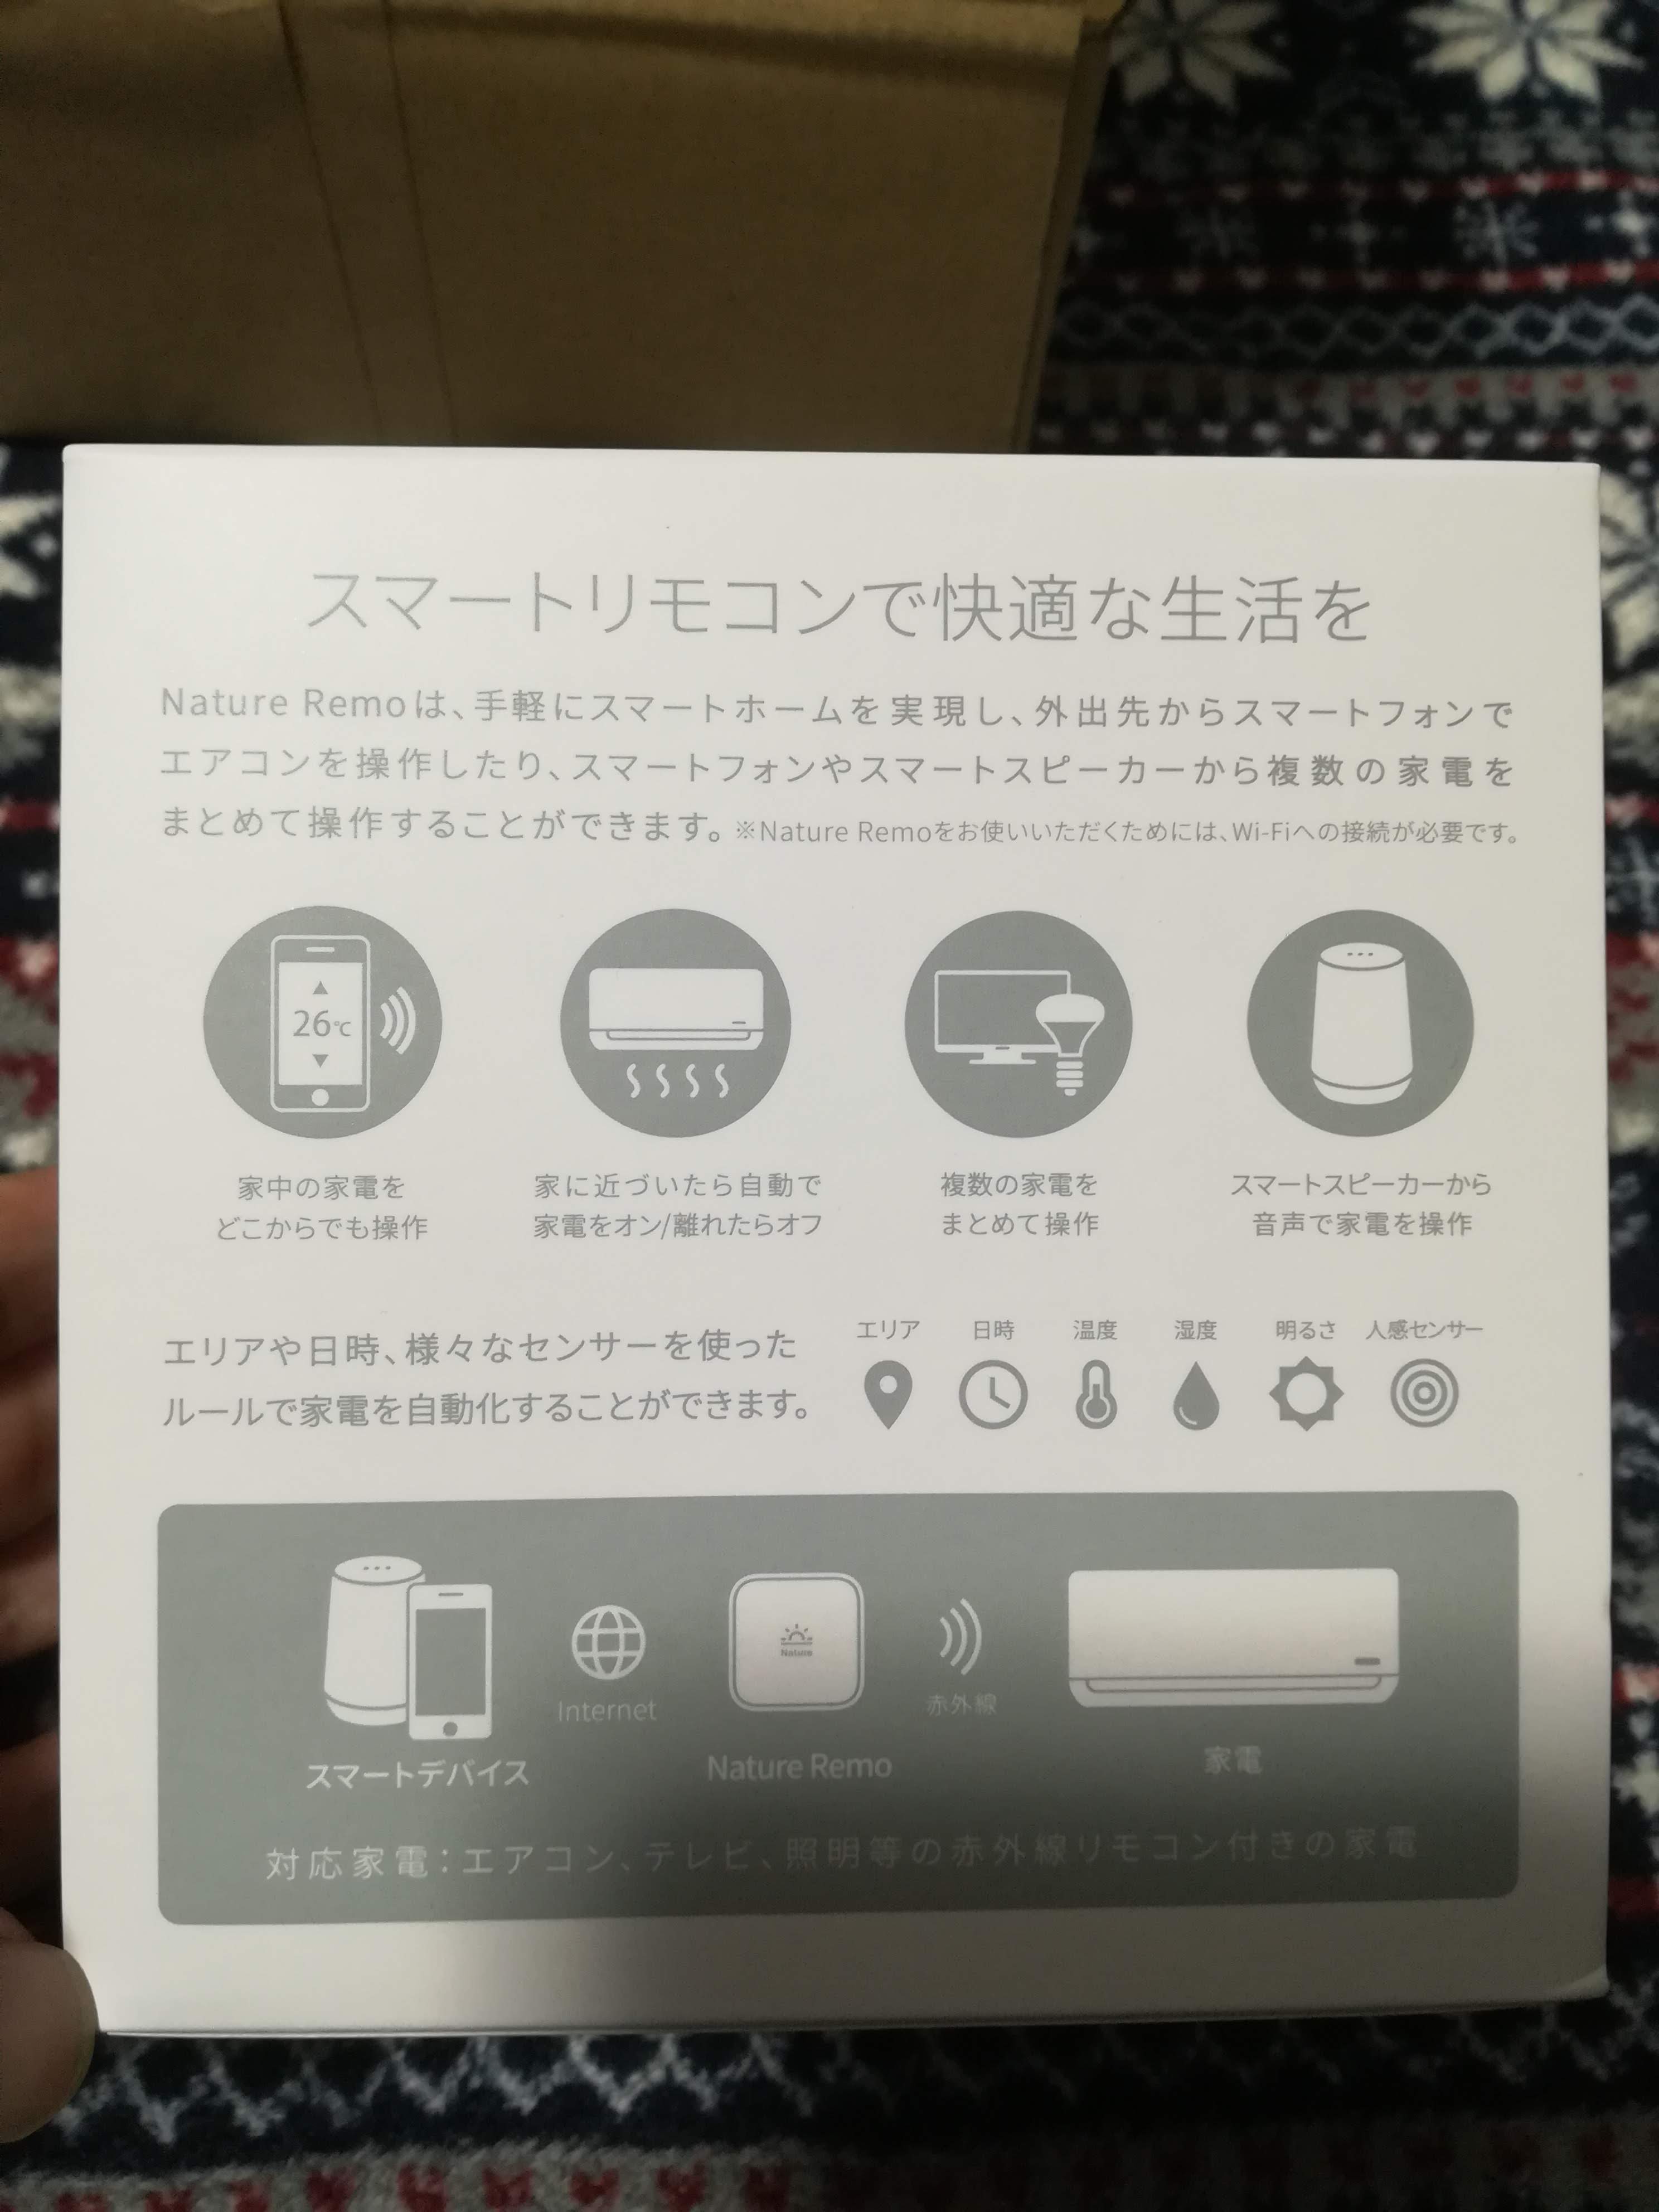 DC PlusNature スマートリモコン Nature Remo Remo-1W2（2nd Generation） 製造、工場用 